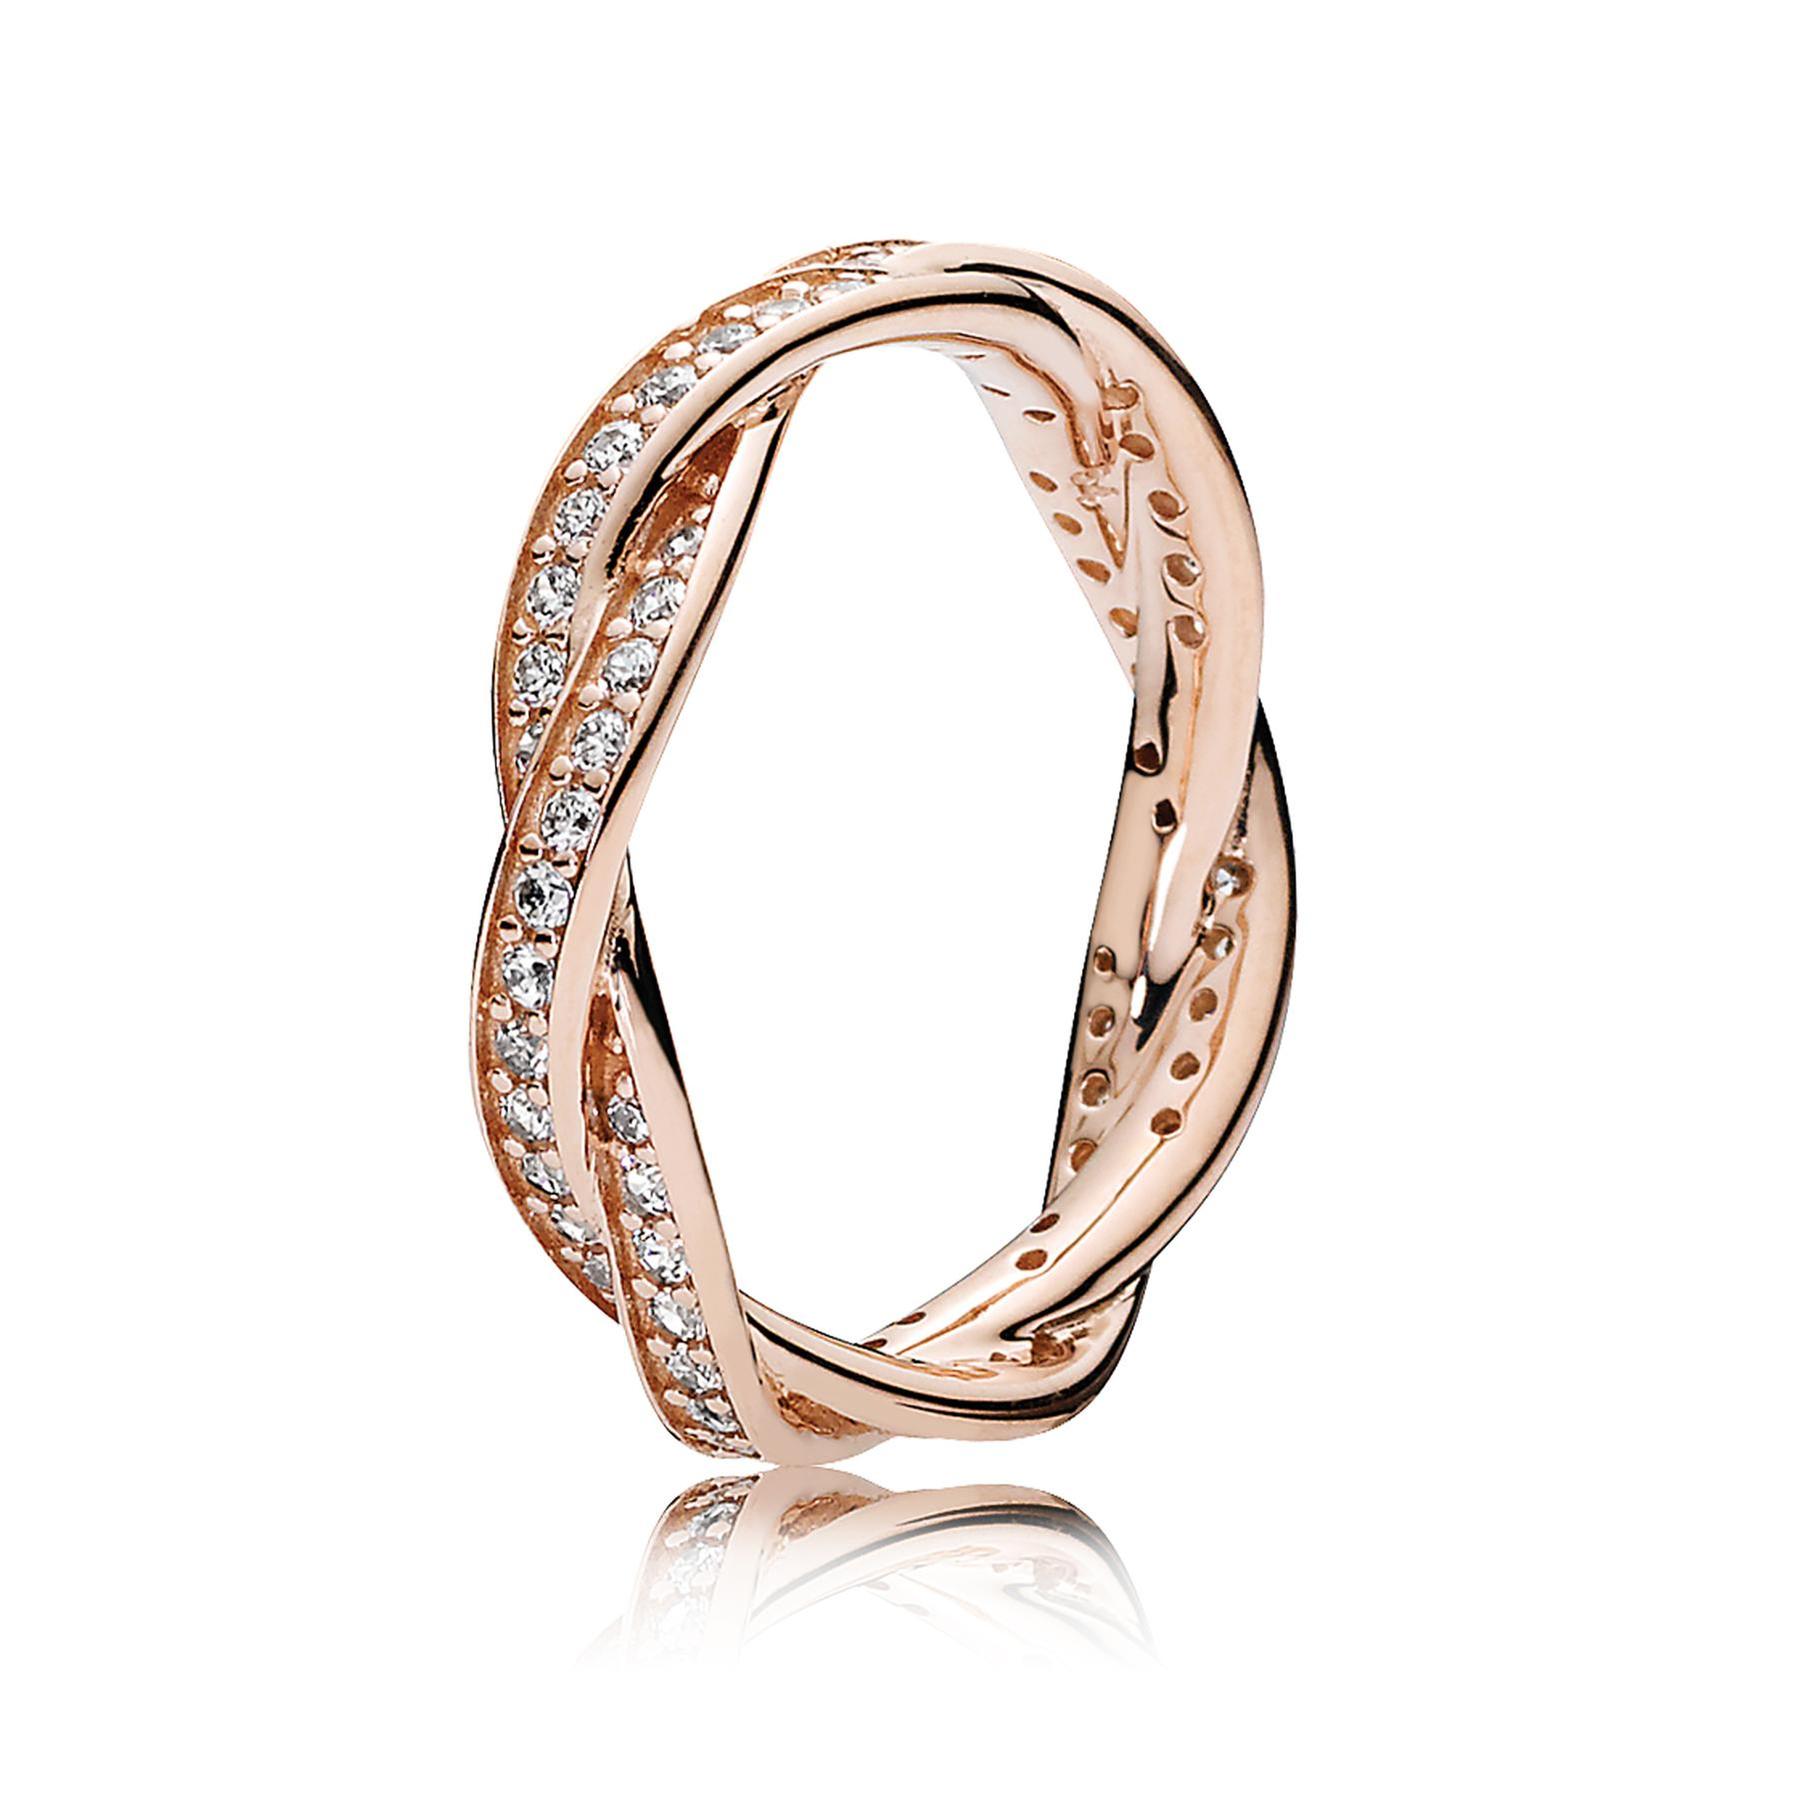 Pandora Twist of Fate Ring with Clear Cubic Zirconia, Rose Gold-Plated - Size 8.5